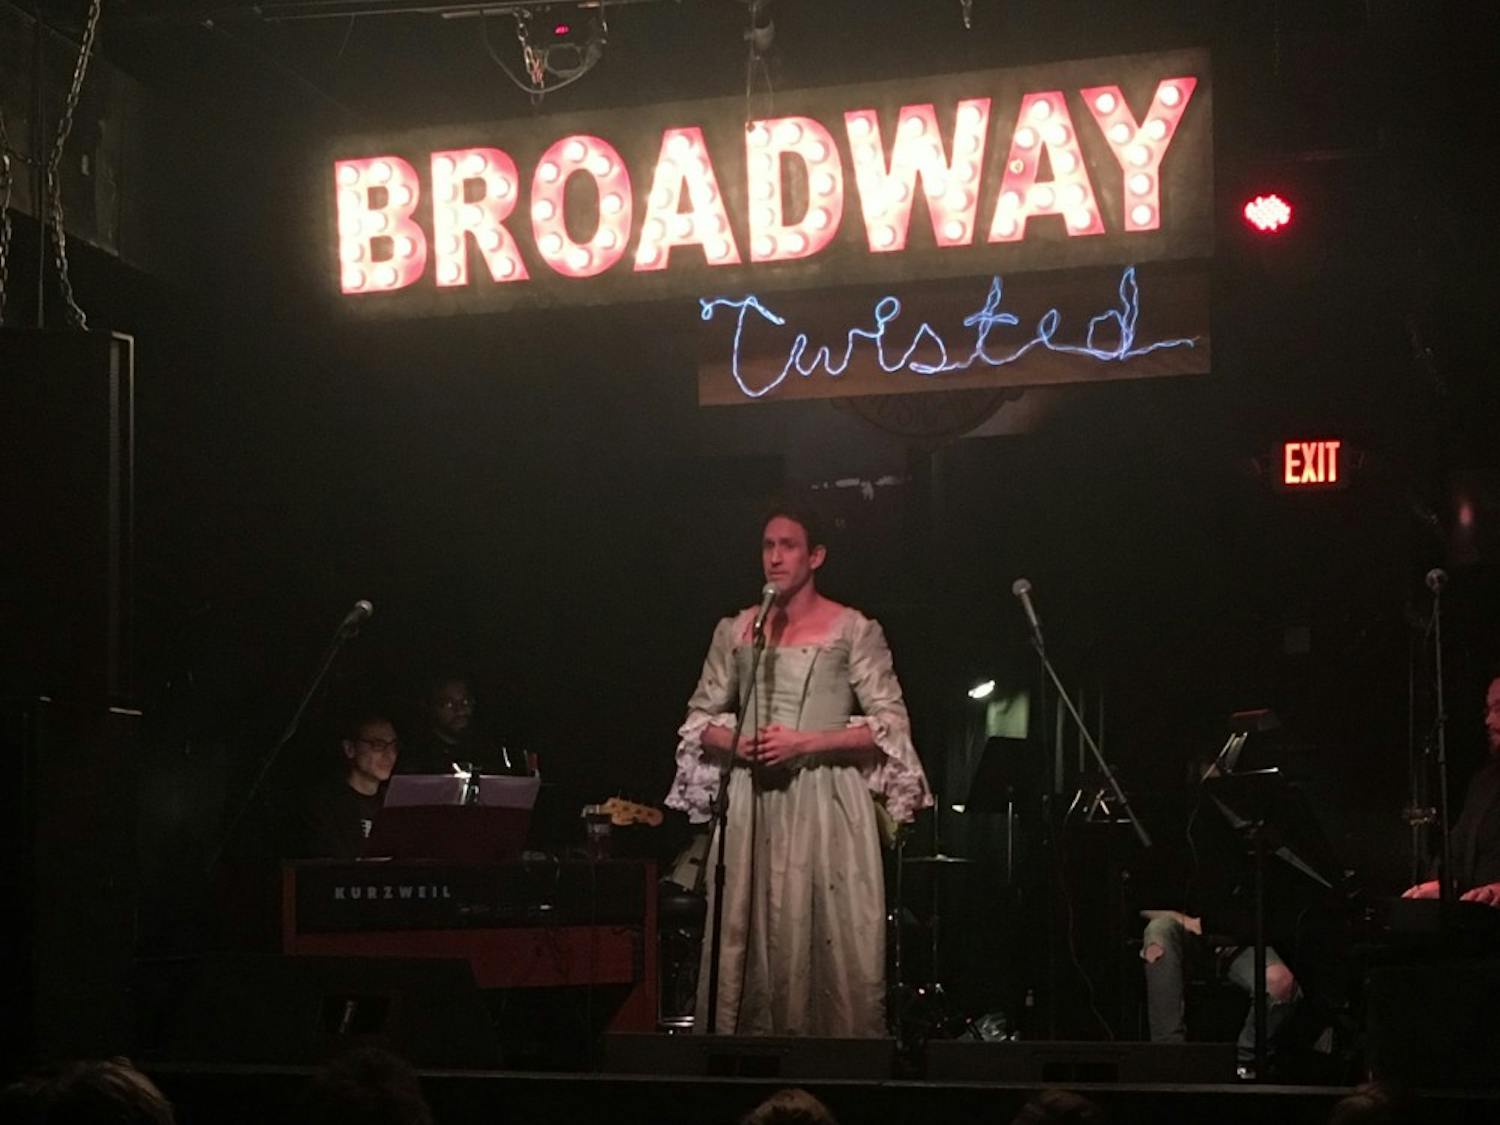 Schuyler mastain performs "Burn" from Hamilton at Local 506 on Monday to help raise awareness for HIV/AIDS with Broadway Twisted.